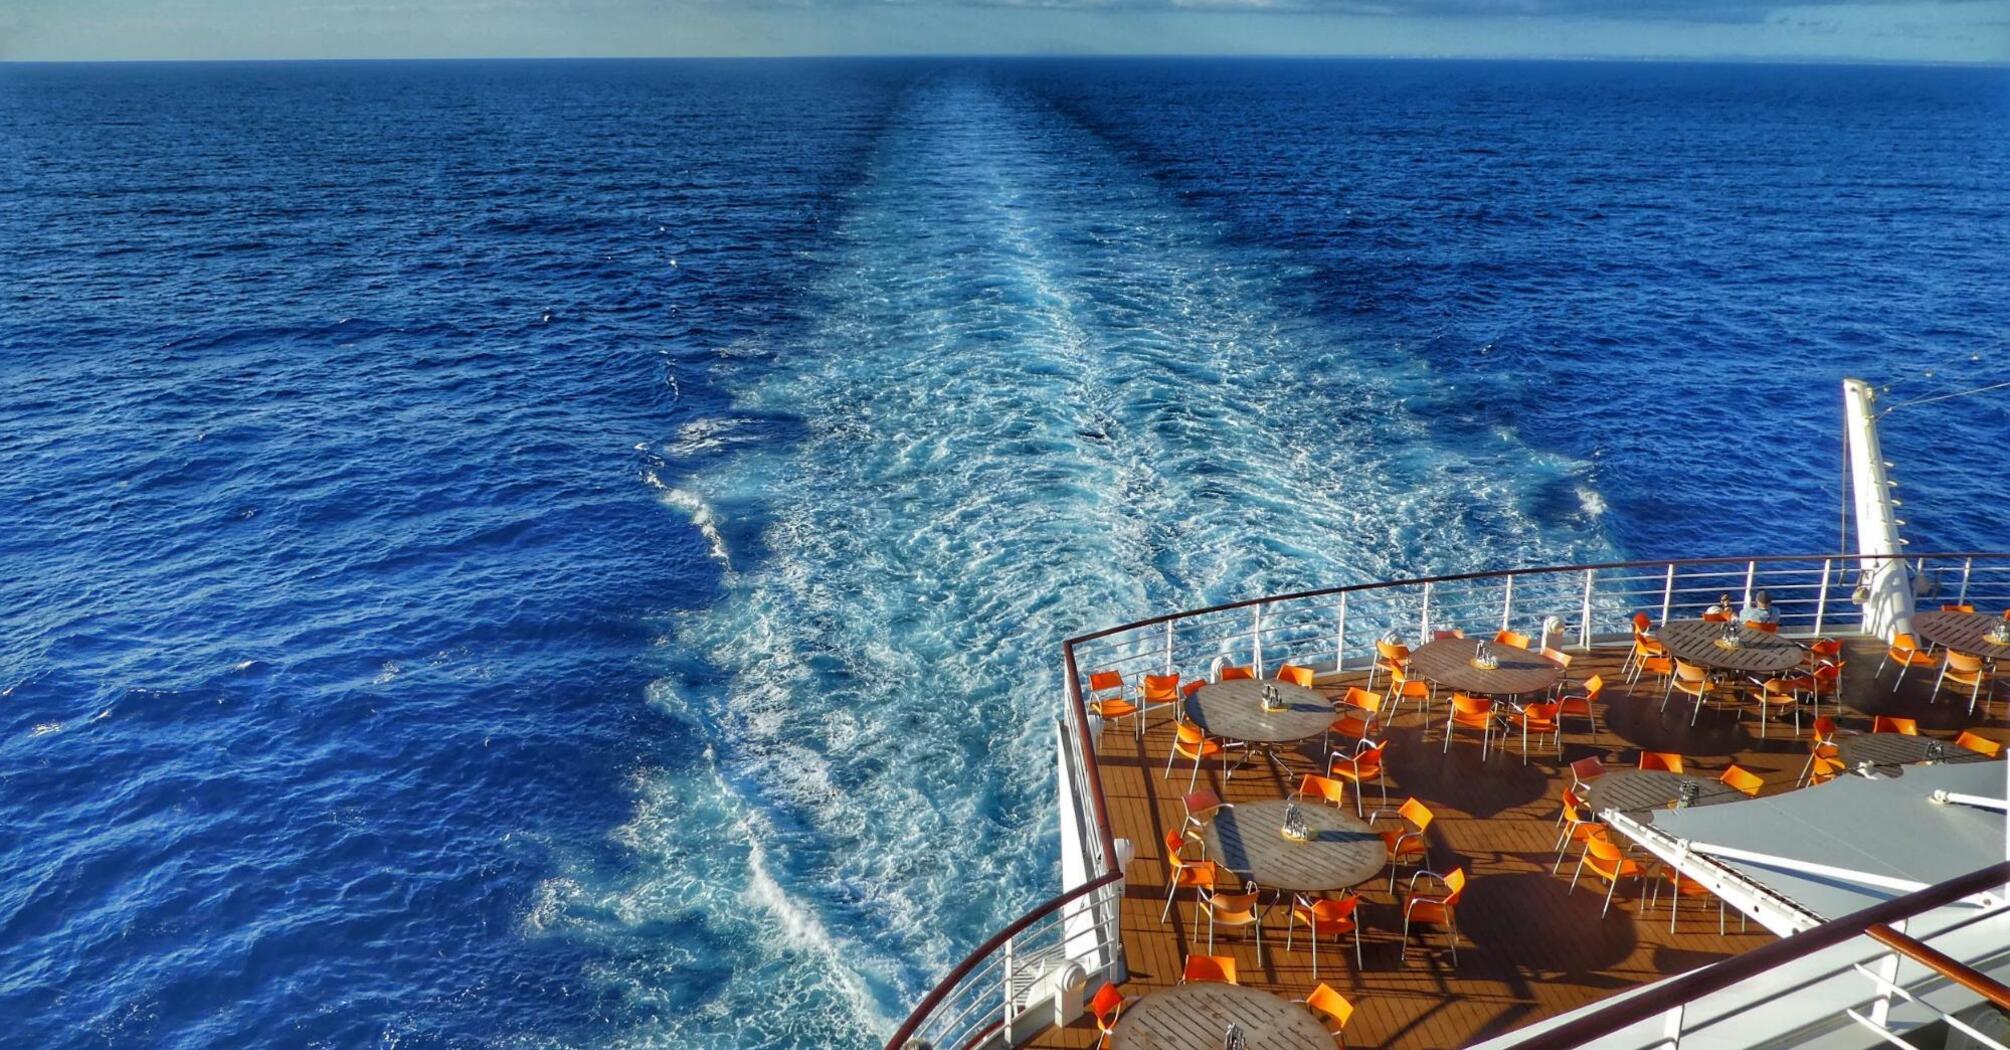 A serene view from the deck of a cruise ship